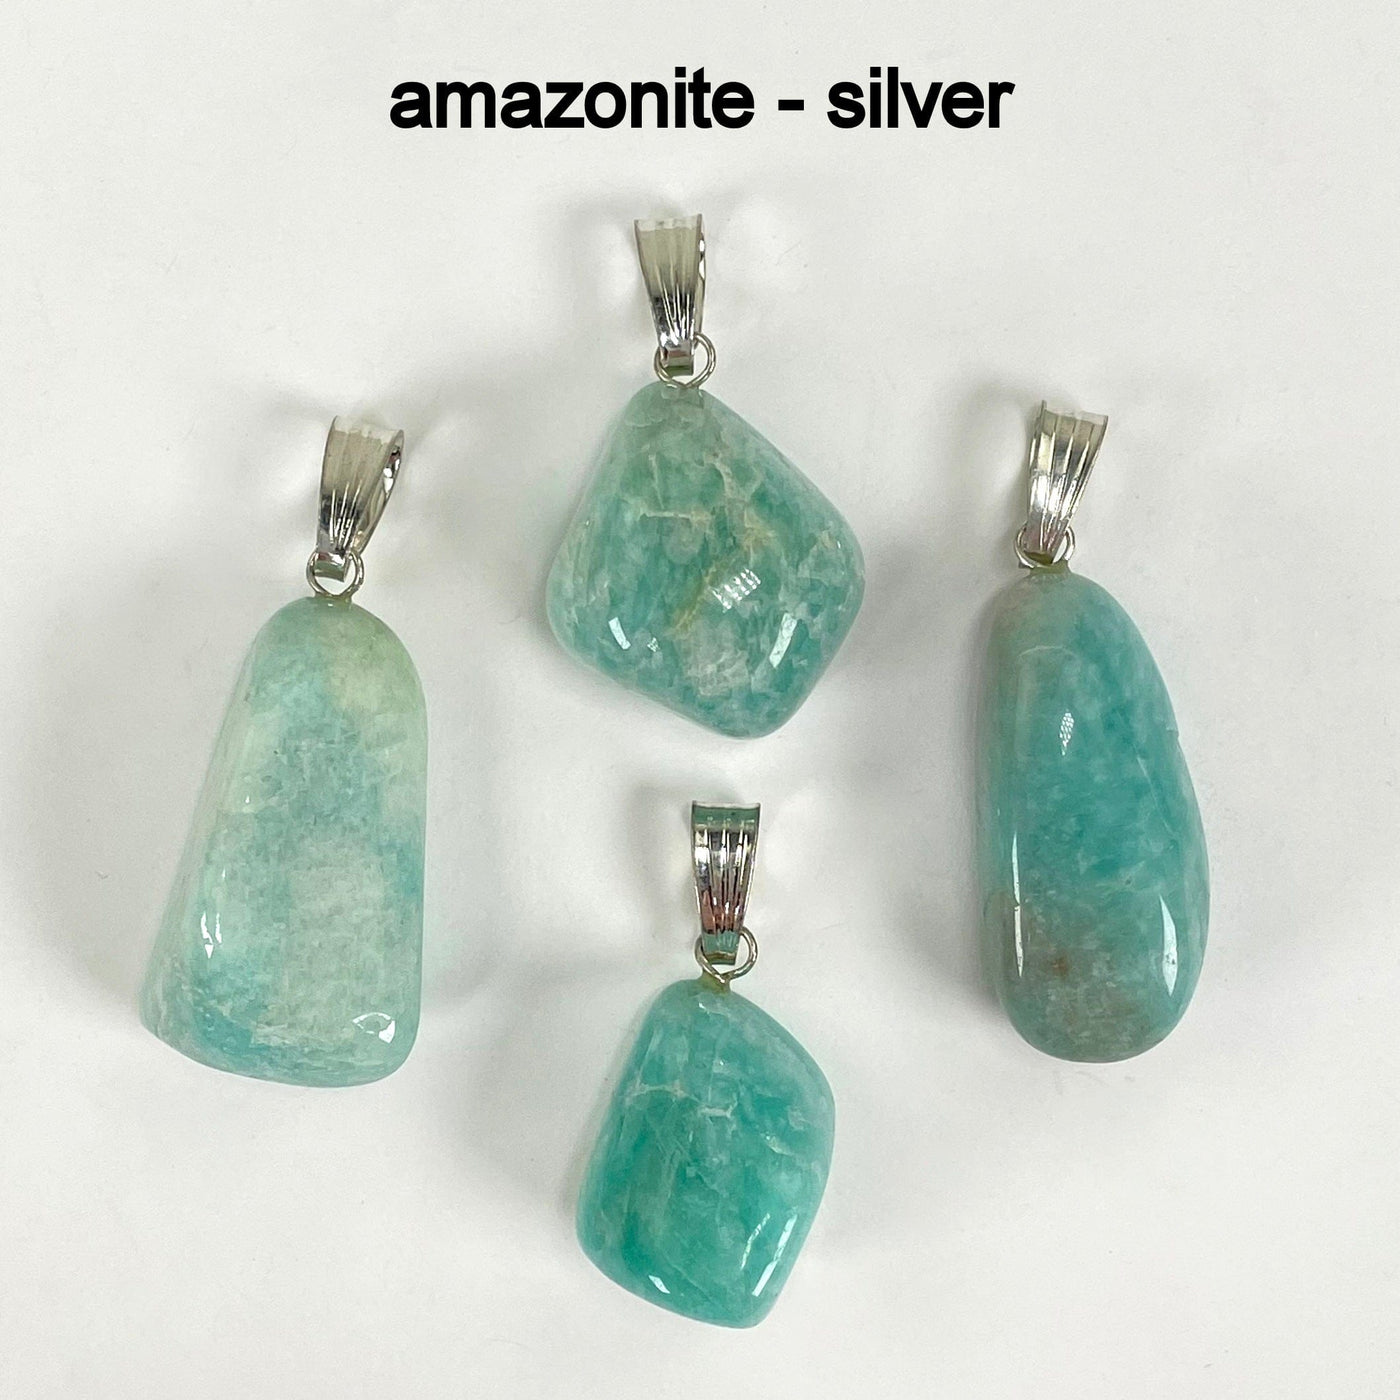 close up of four tumbled amazonite pendants in silver for possible stone variations and details